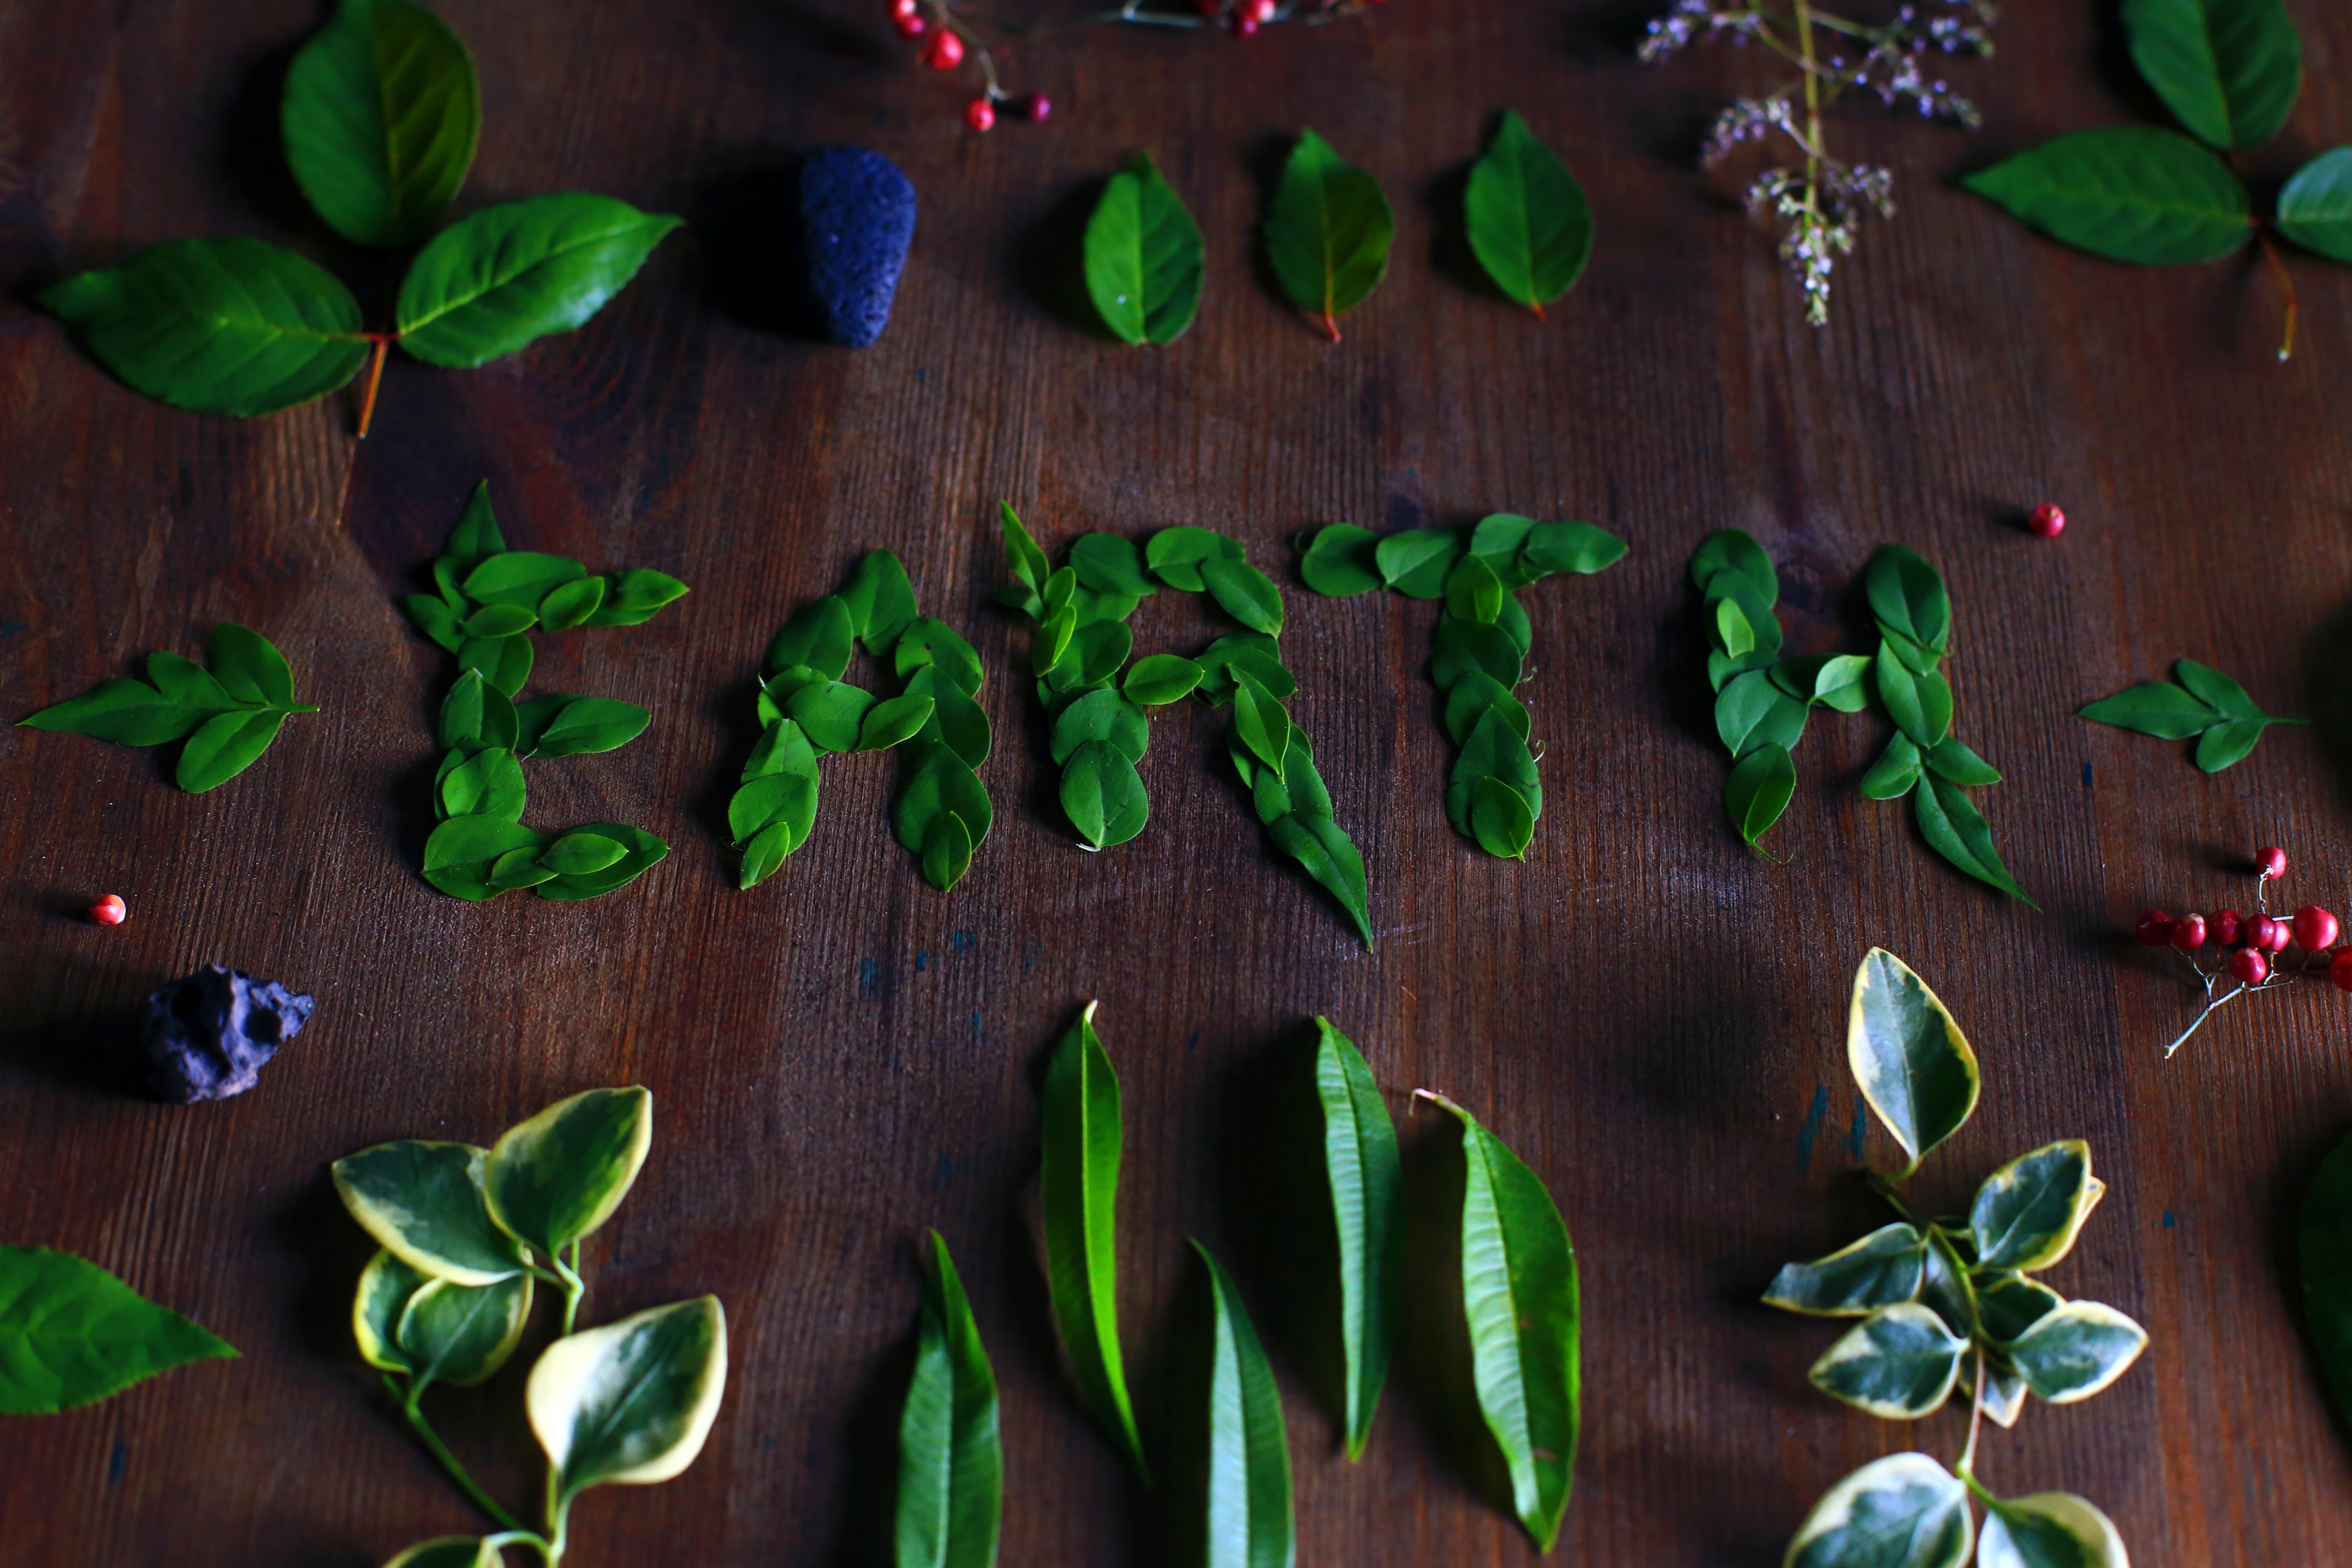 I made an Earth lettering inspired by nature.If you like what you see, you can follow me on Instagram @MiriamespacioThanks!